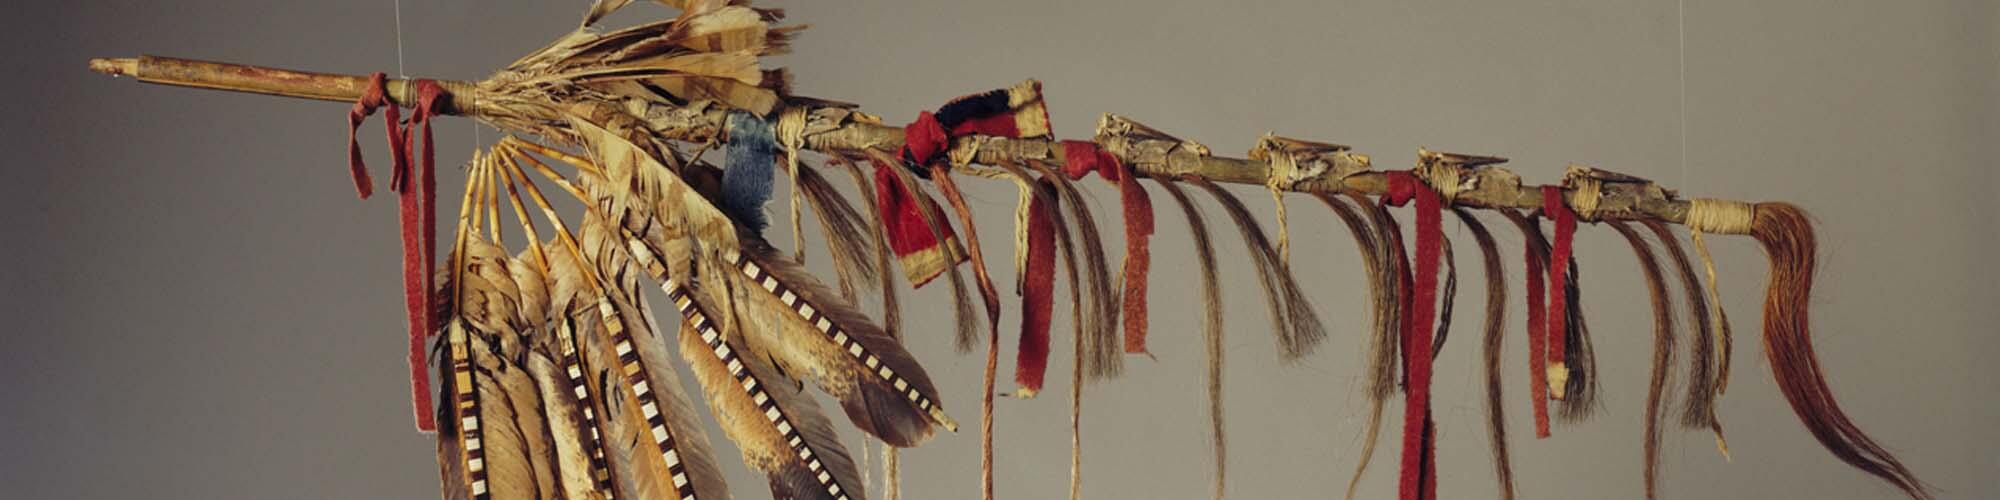 Ceremonial pipe decorated with striped feathers and red and blue ribbon.